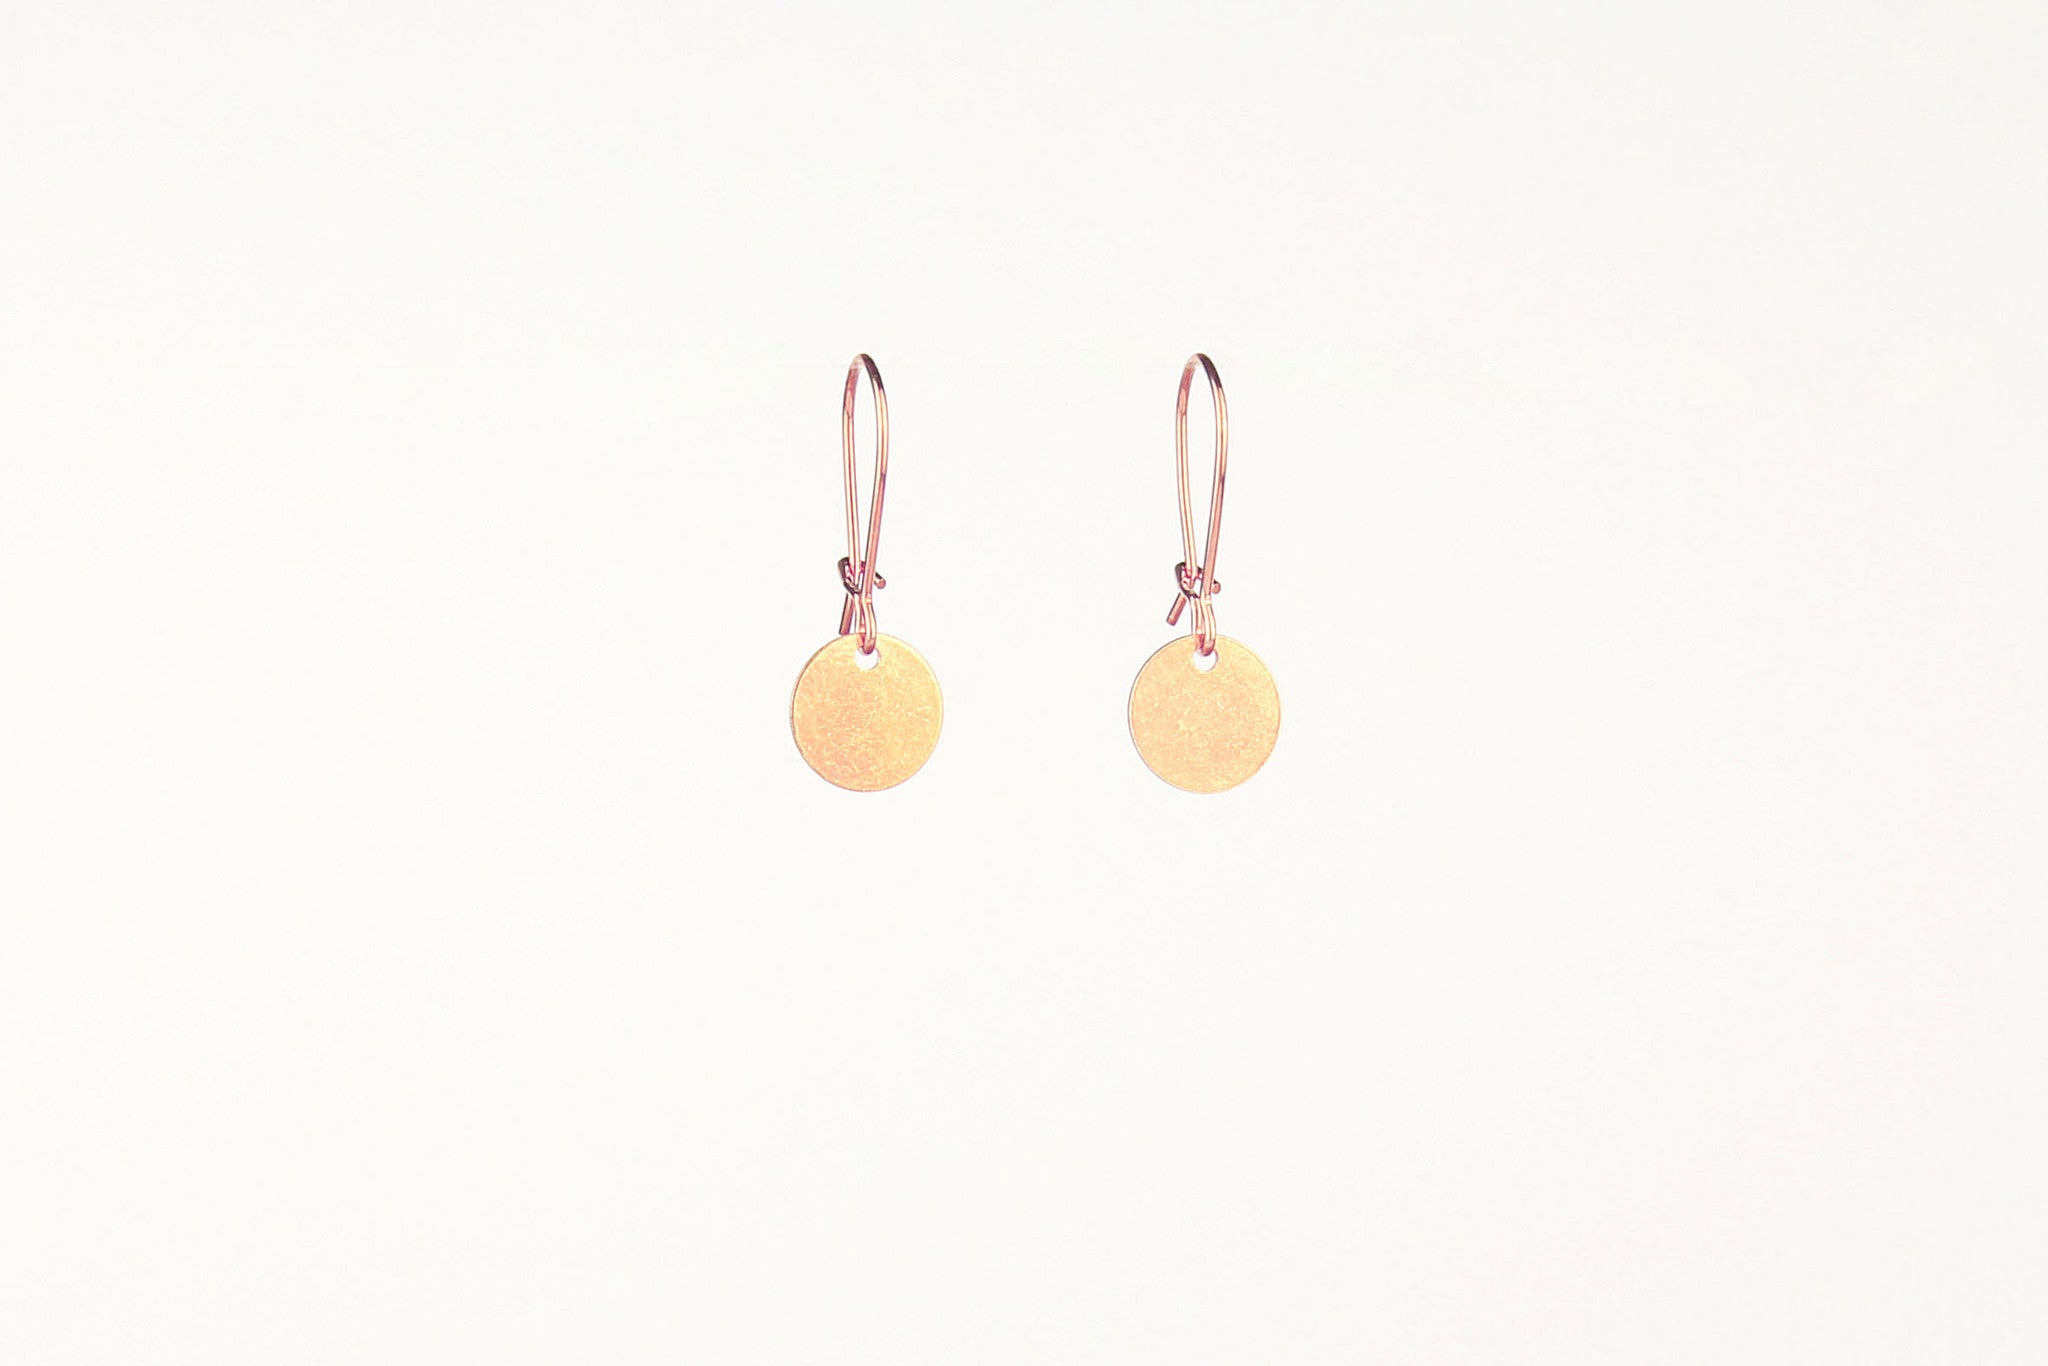 jewelberry ohrringe earrings small disc rose gold plated sterling silver fine jewelry handmade with love fairtrade